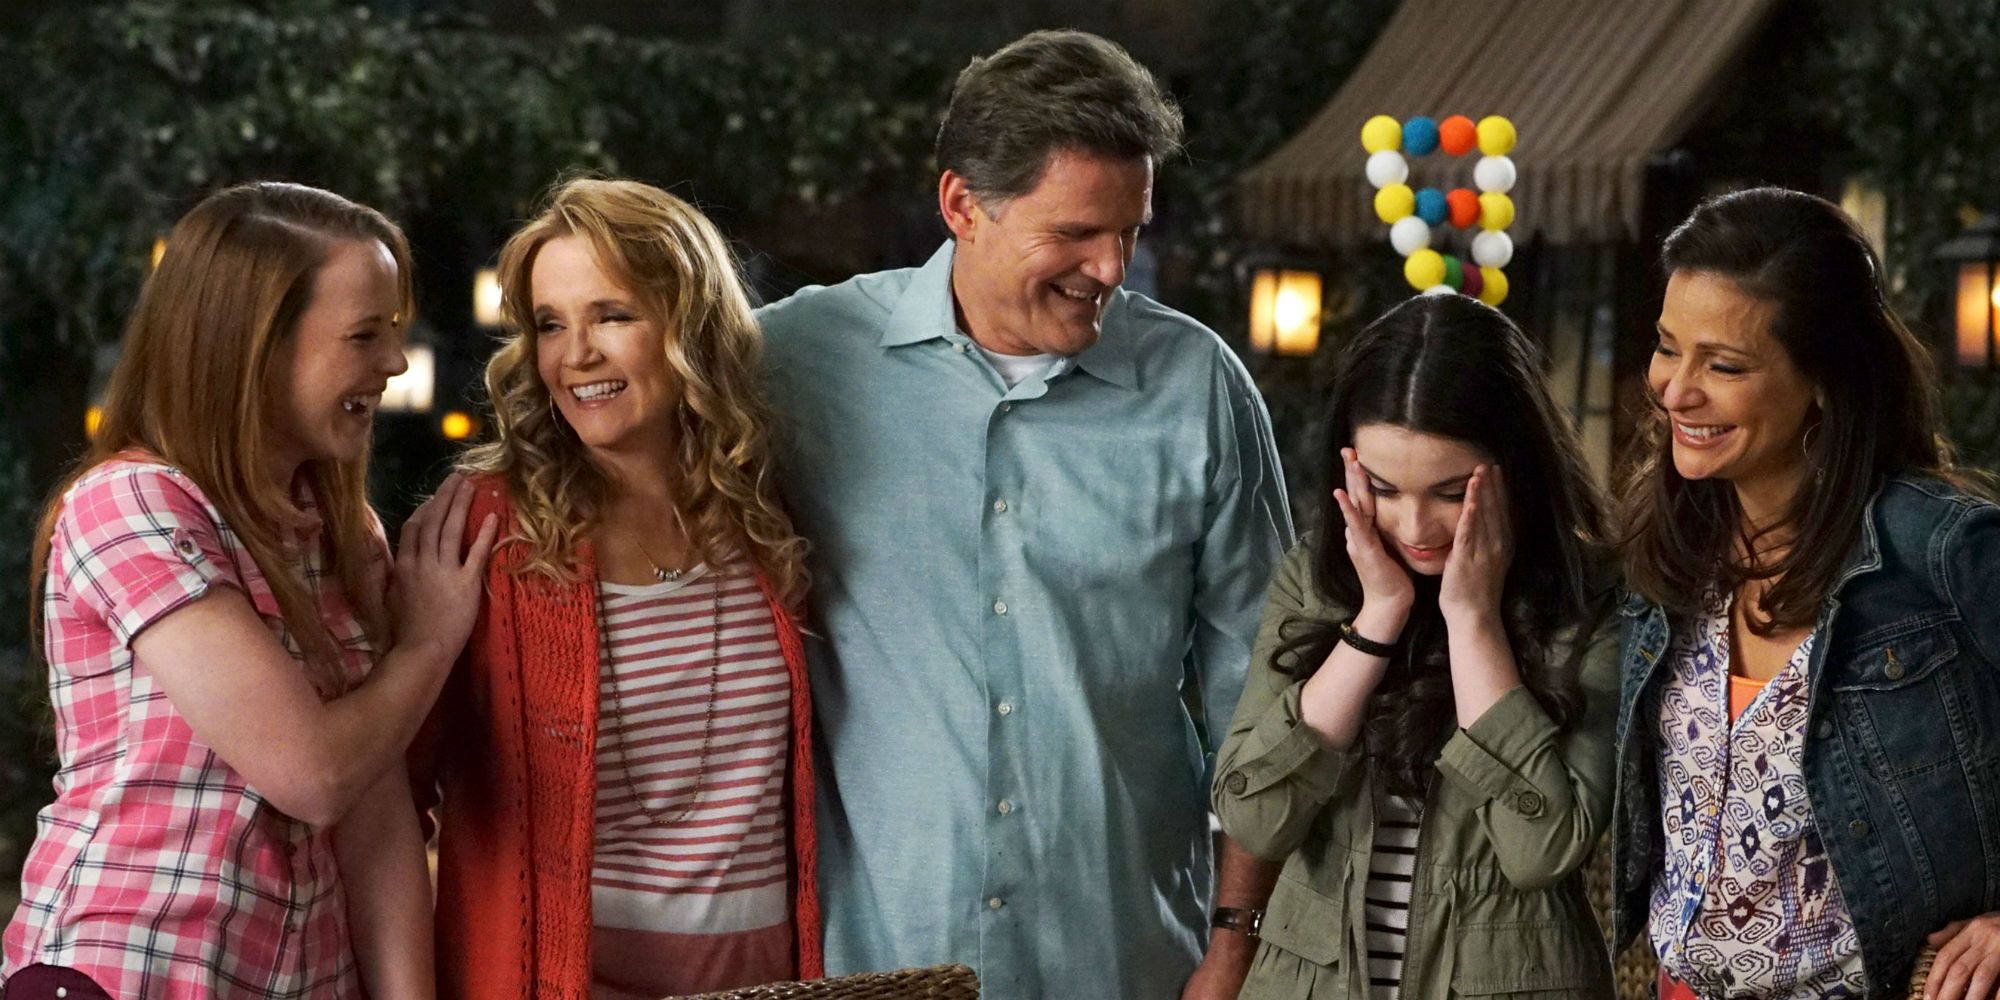 Switched At Birth Episode Guide